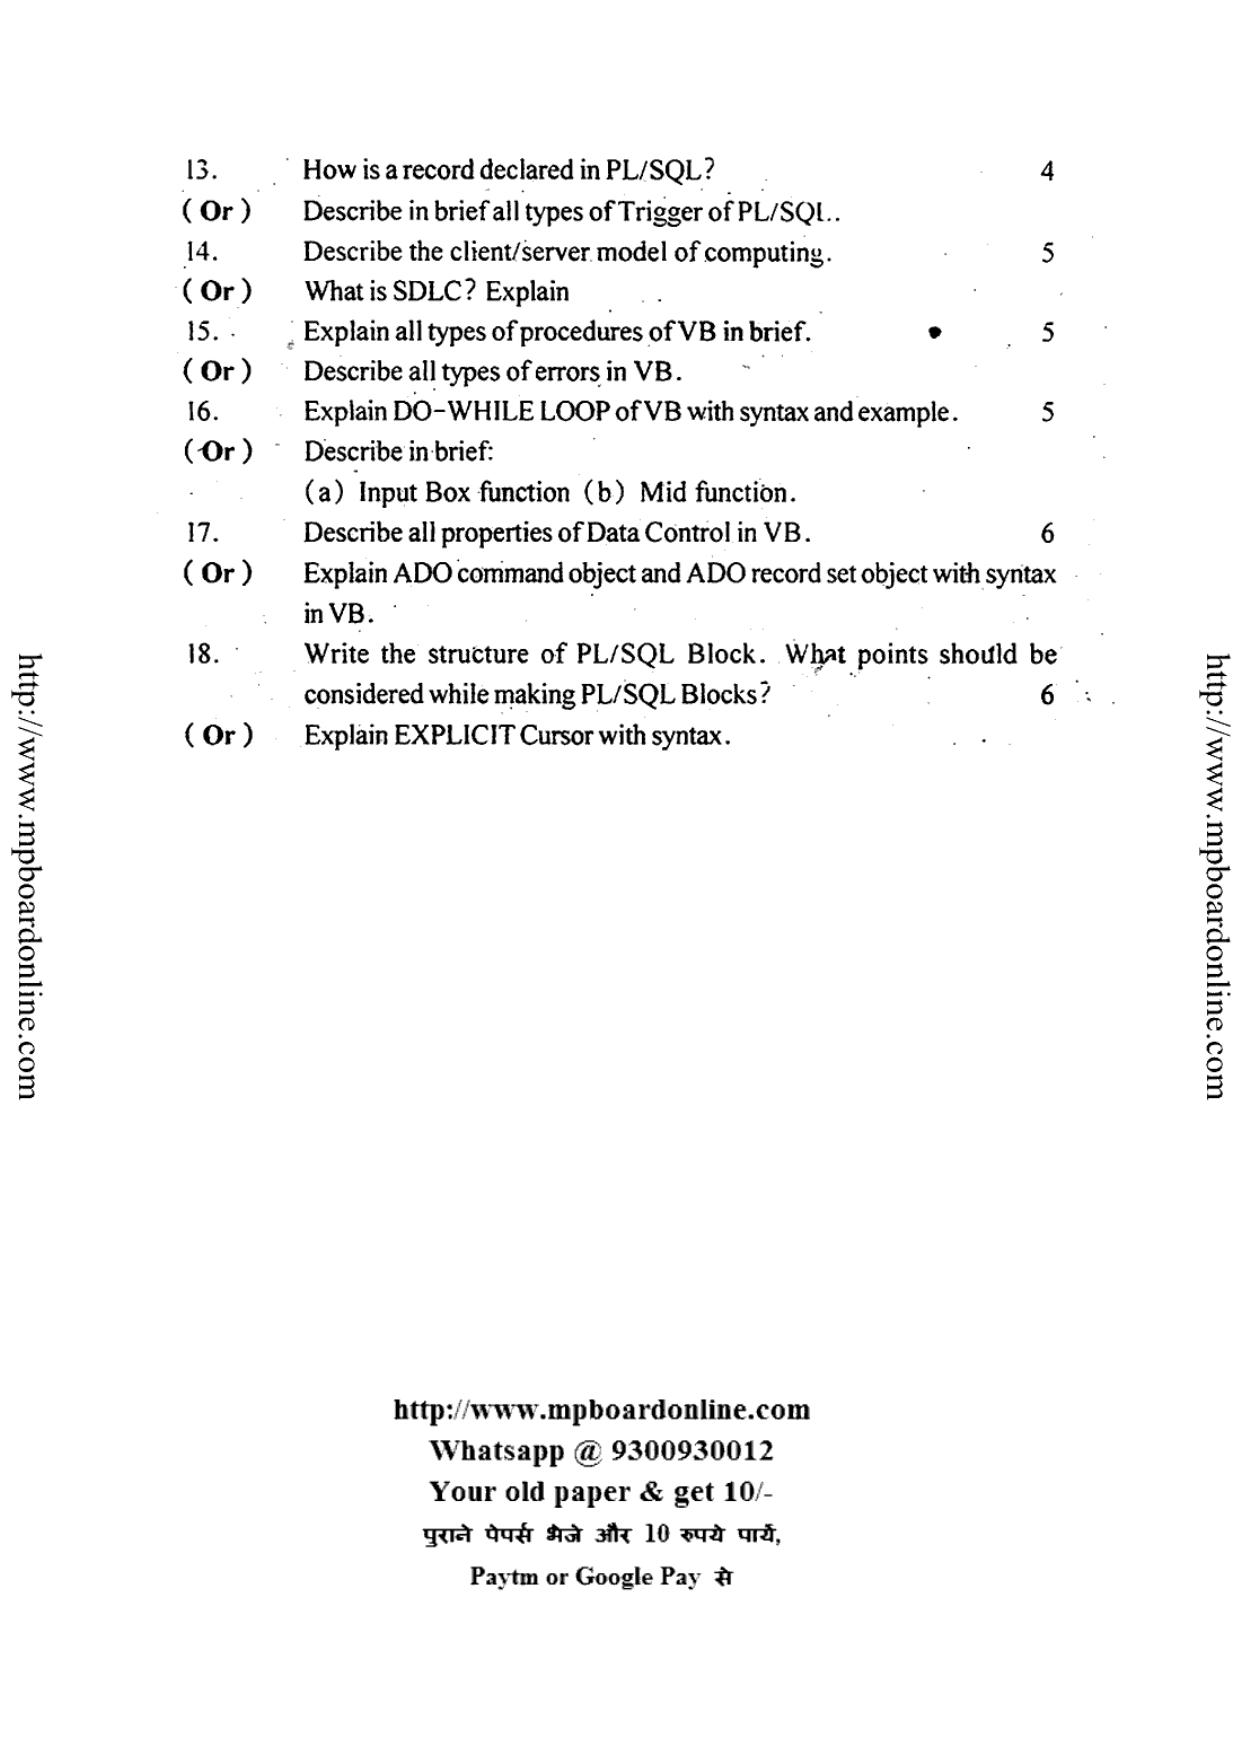 MP Board Class 12 Informatics Practices (English Medium) 2014 Question Paper - Page 3